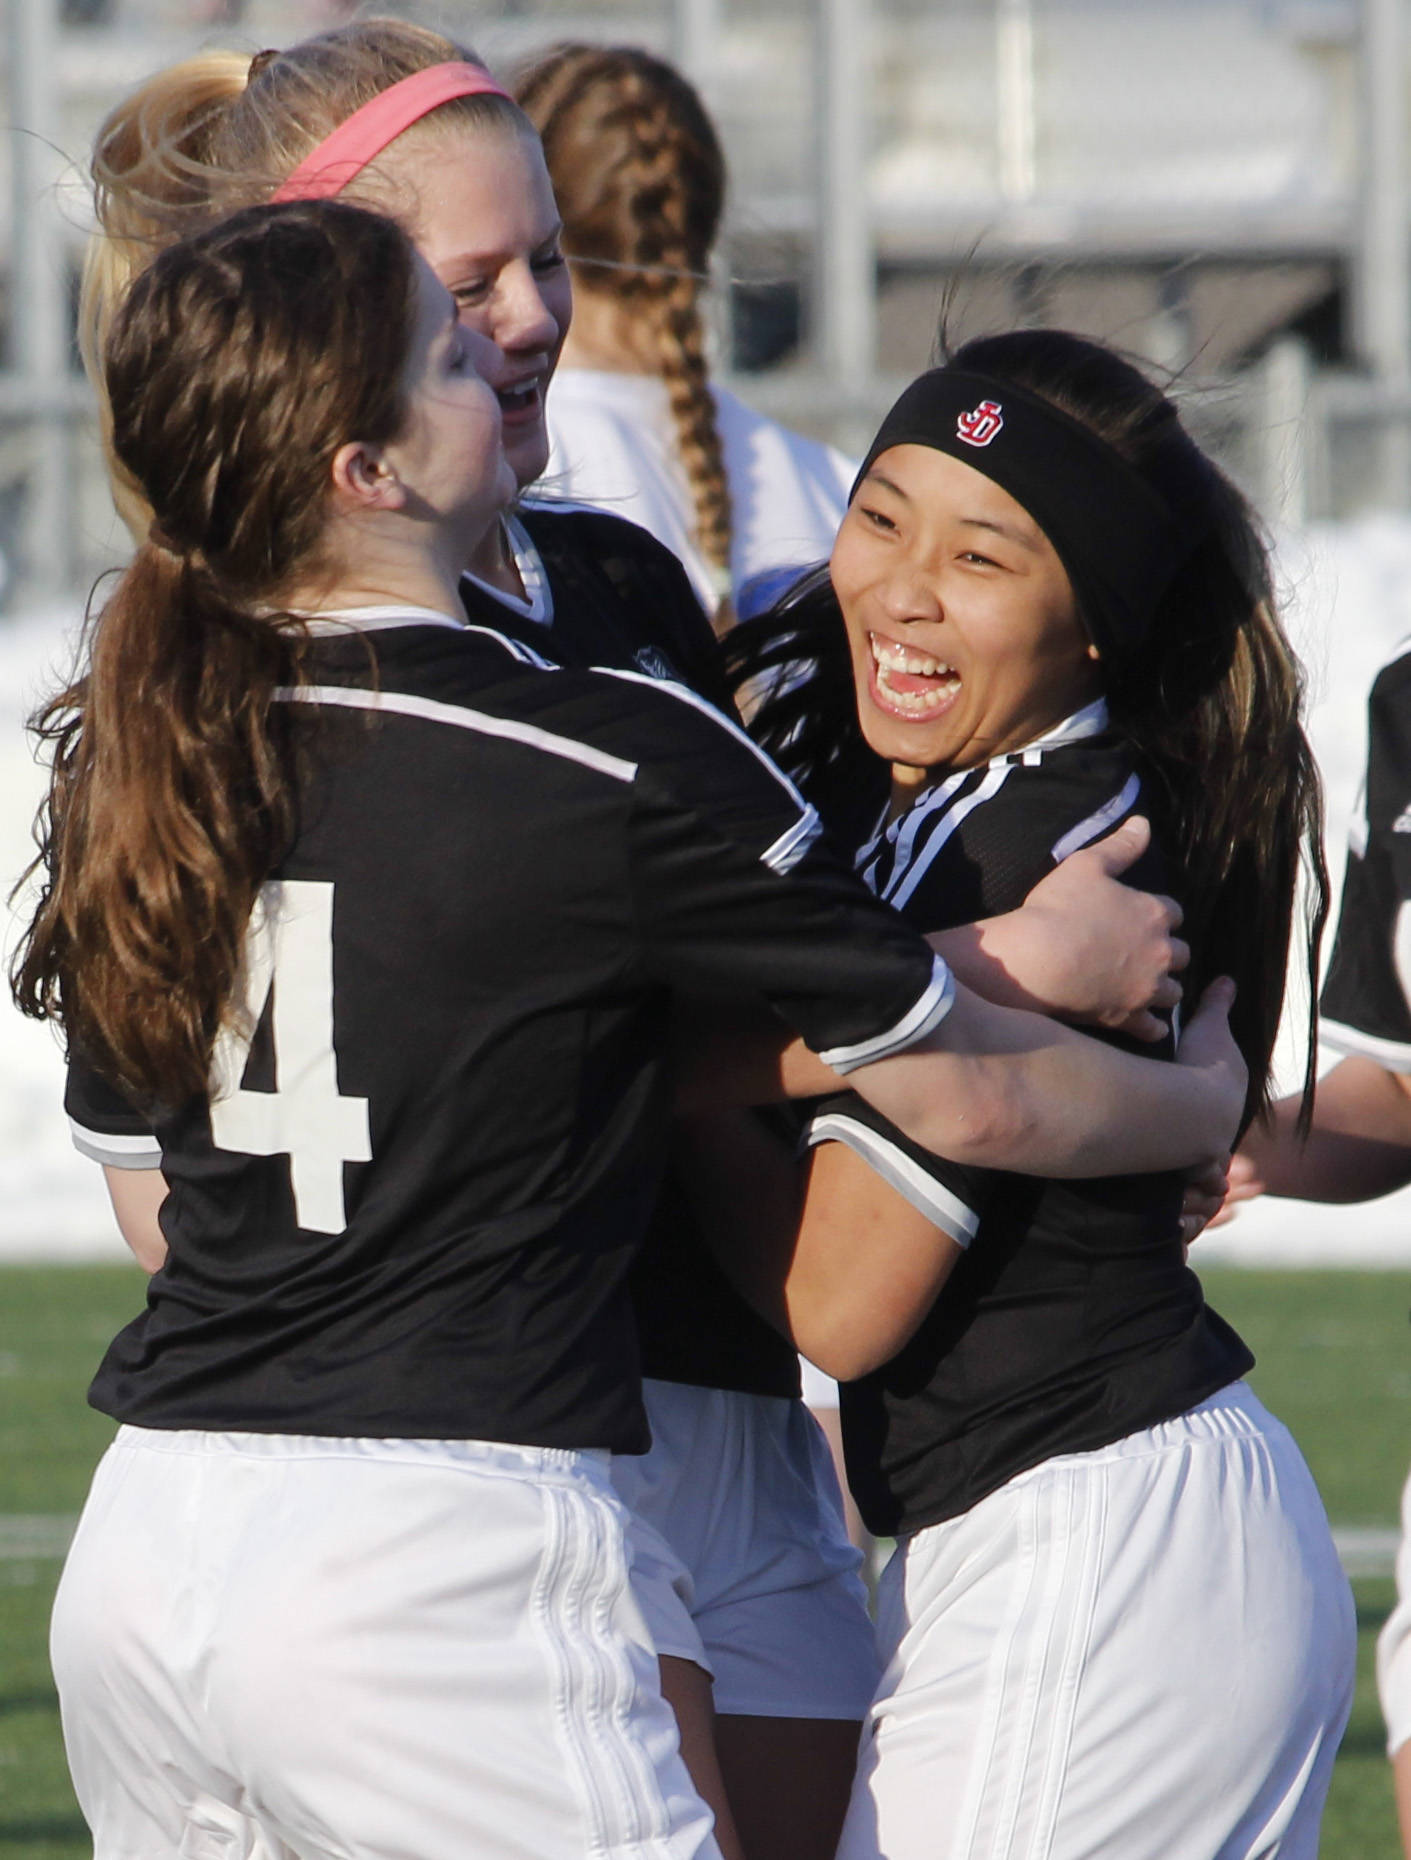 Juneau-Douglas High School sophomore Asianna Mazon (right) celebrates with teammates after scoring a goal in the second half of the team’s 5-2 win over Thunder Mountain High School on Friday, March 30, 2018. (Alex McCarthy | Juneau Empire)